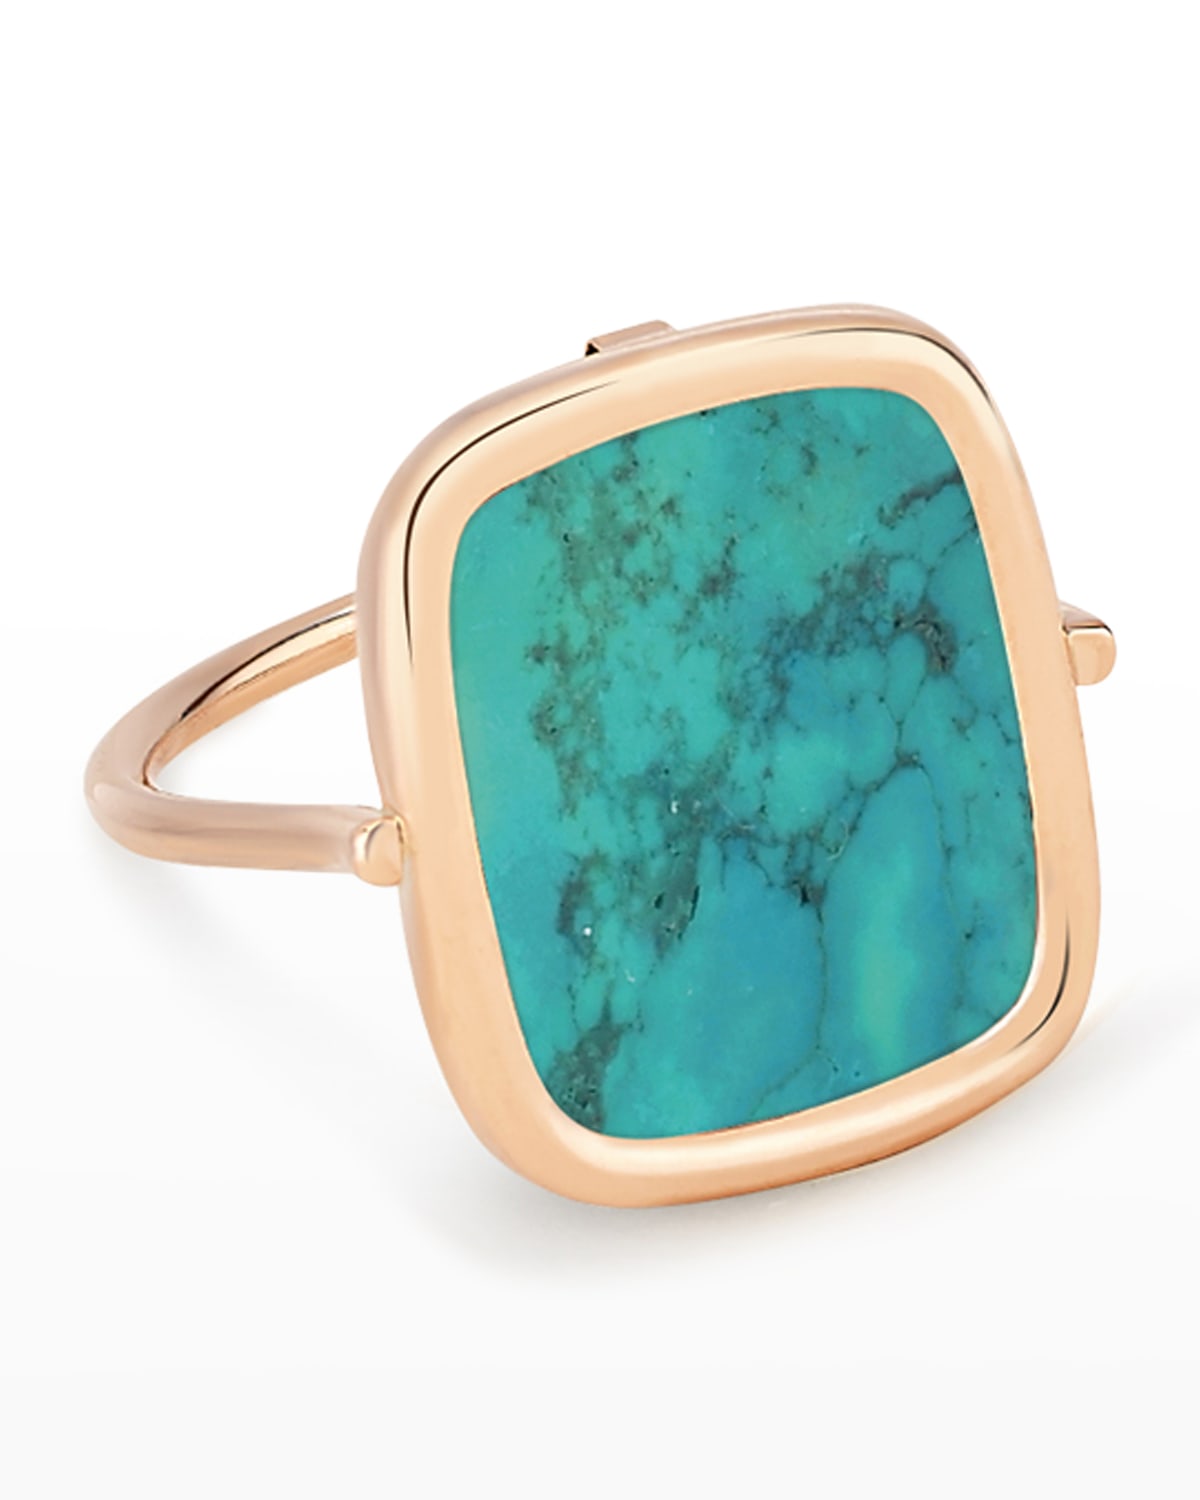 GINETTE NY ROSE GOLD TURQUOISE ANTIQUED RING